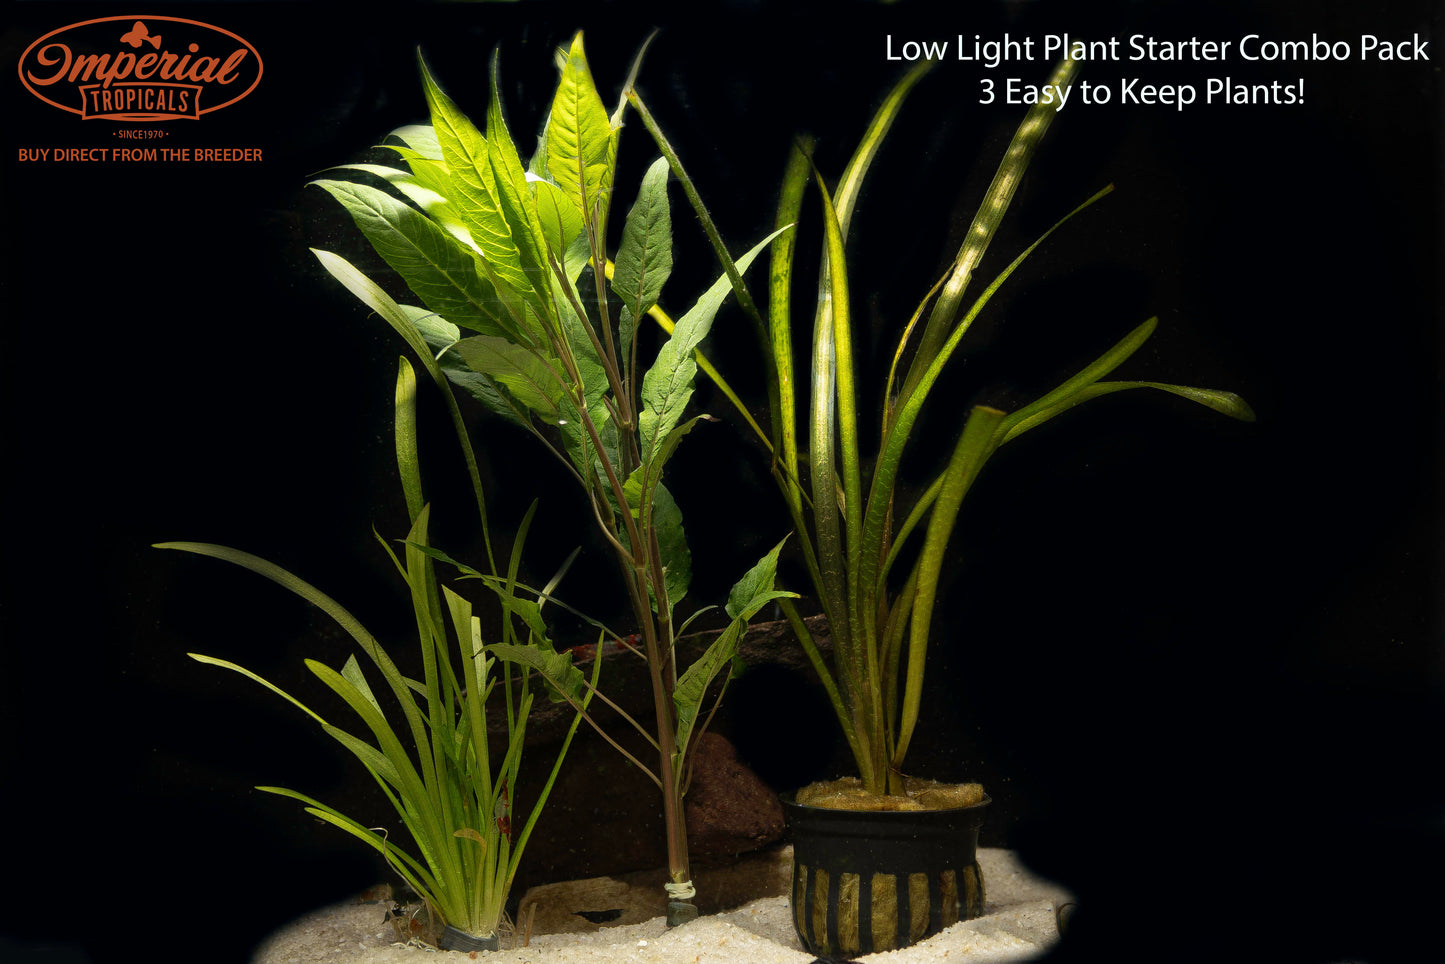 Low Light Plant Starter Combo Pack - 3 Easy to Keep Plants!